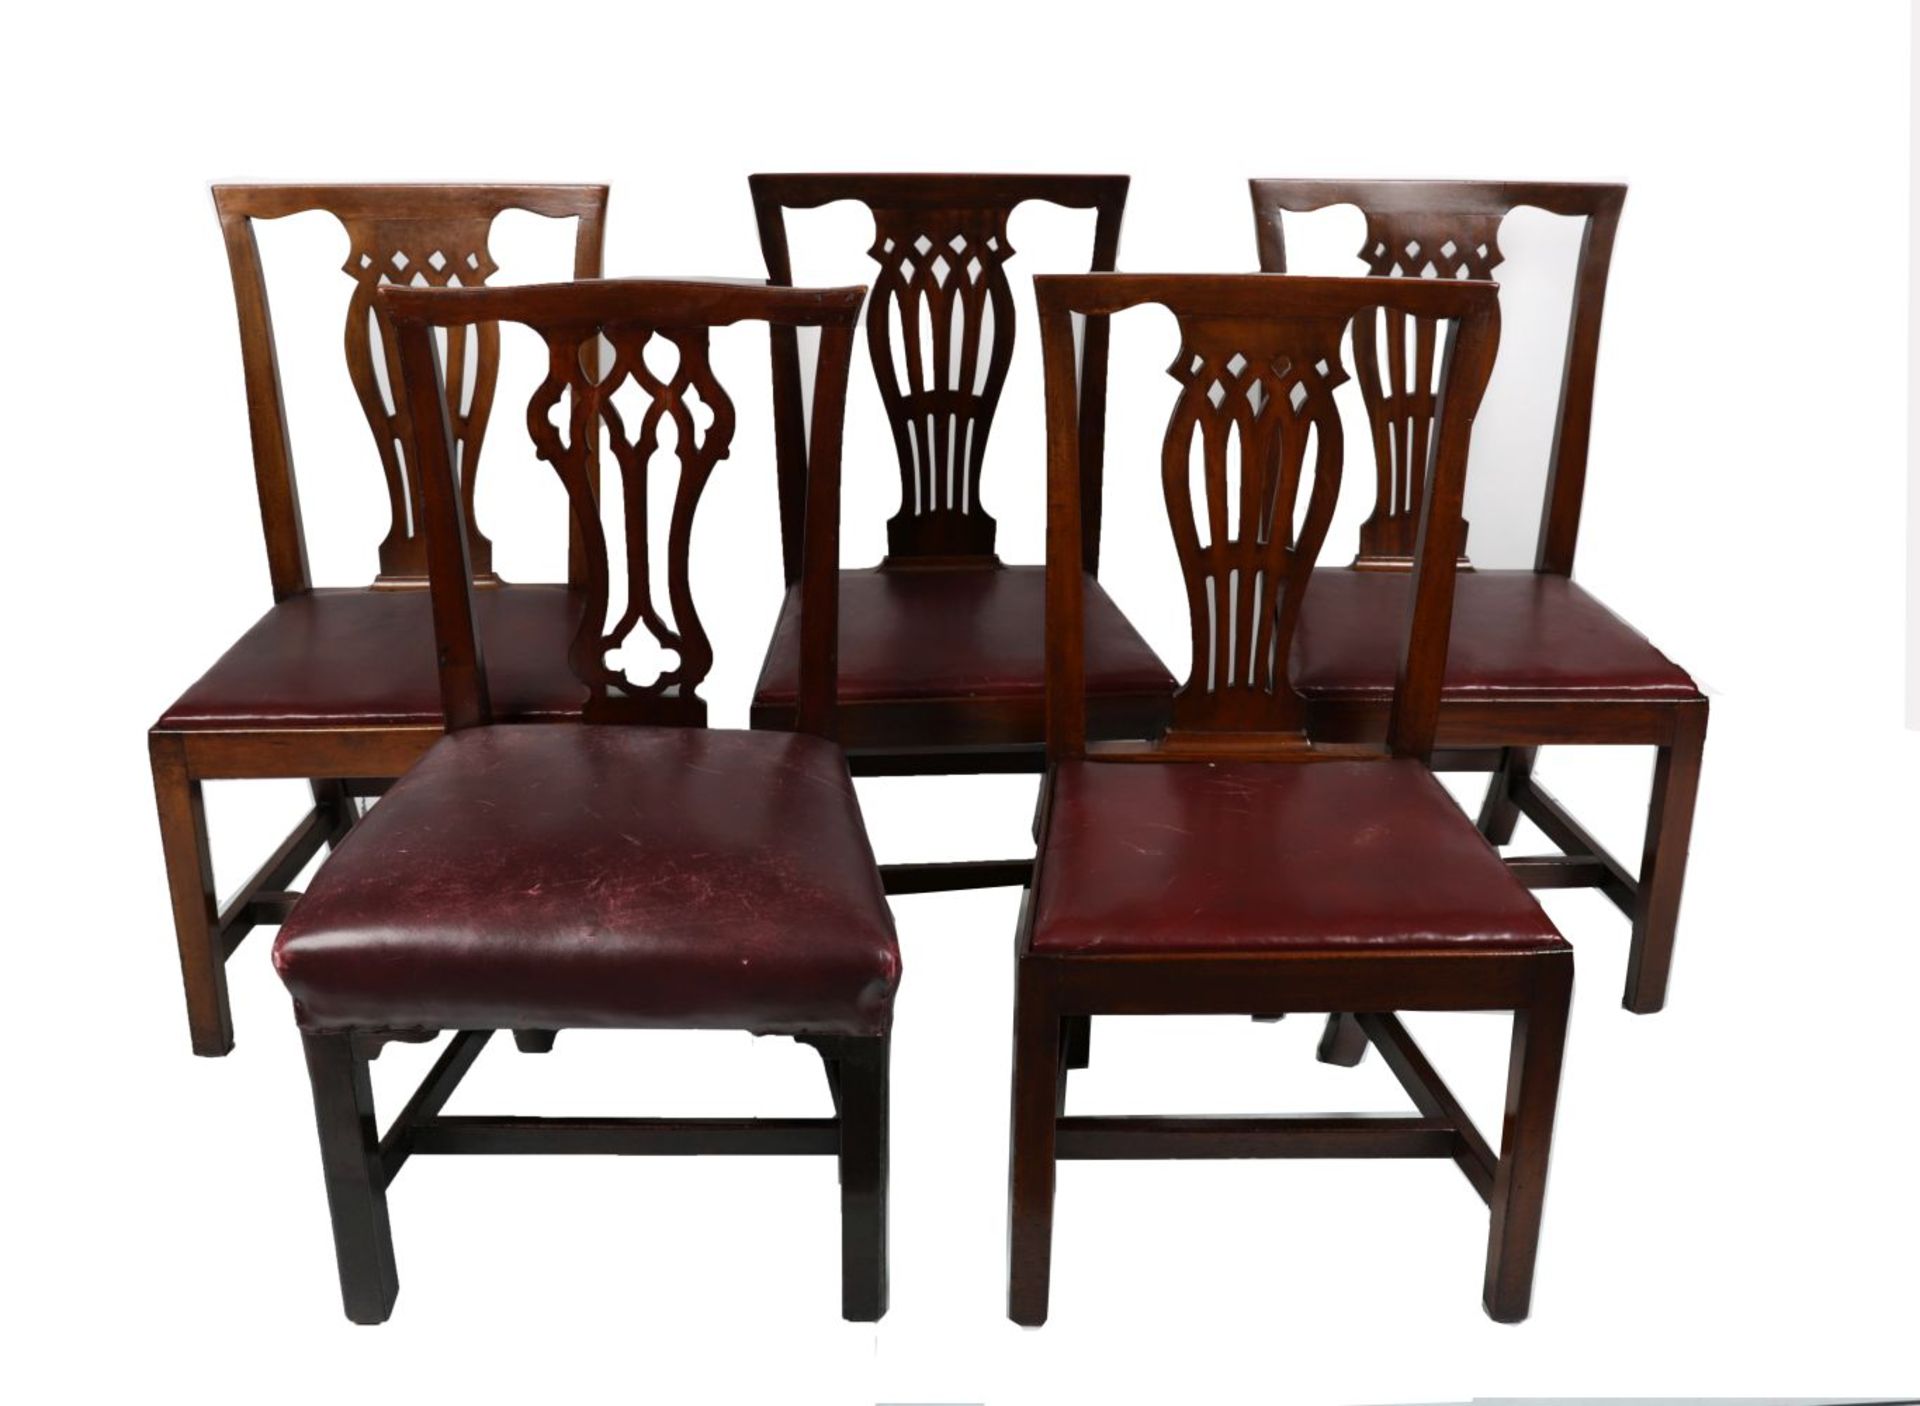 HARLEQUIN SET OF 8 CHIPPENDALE DINING CHAIRS